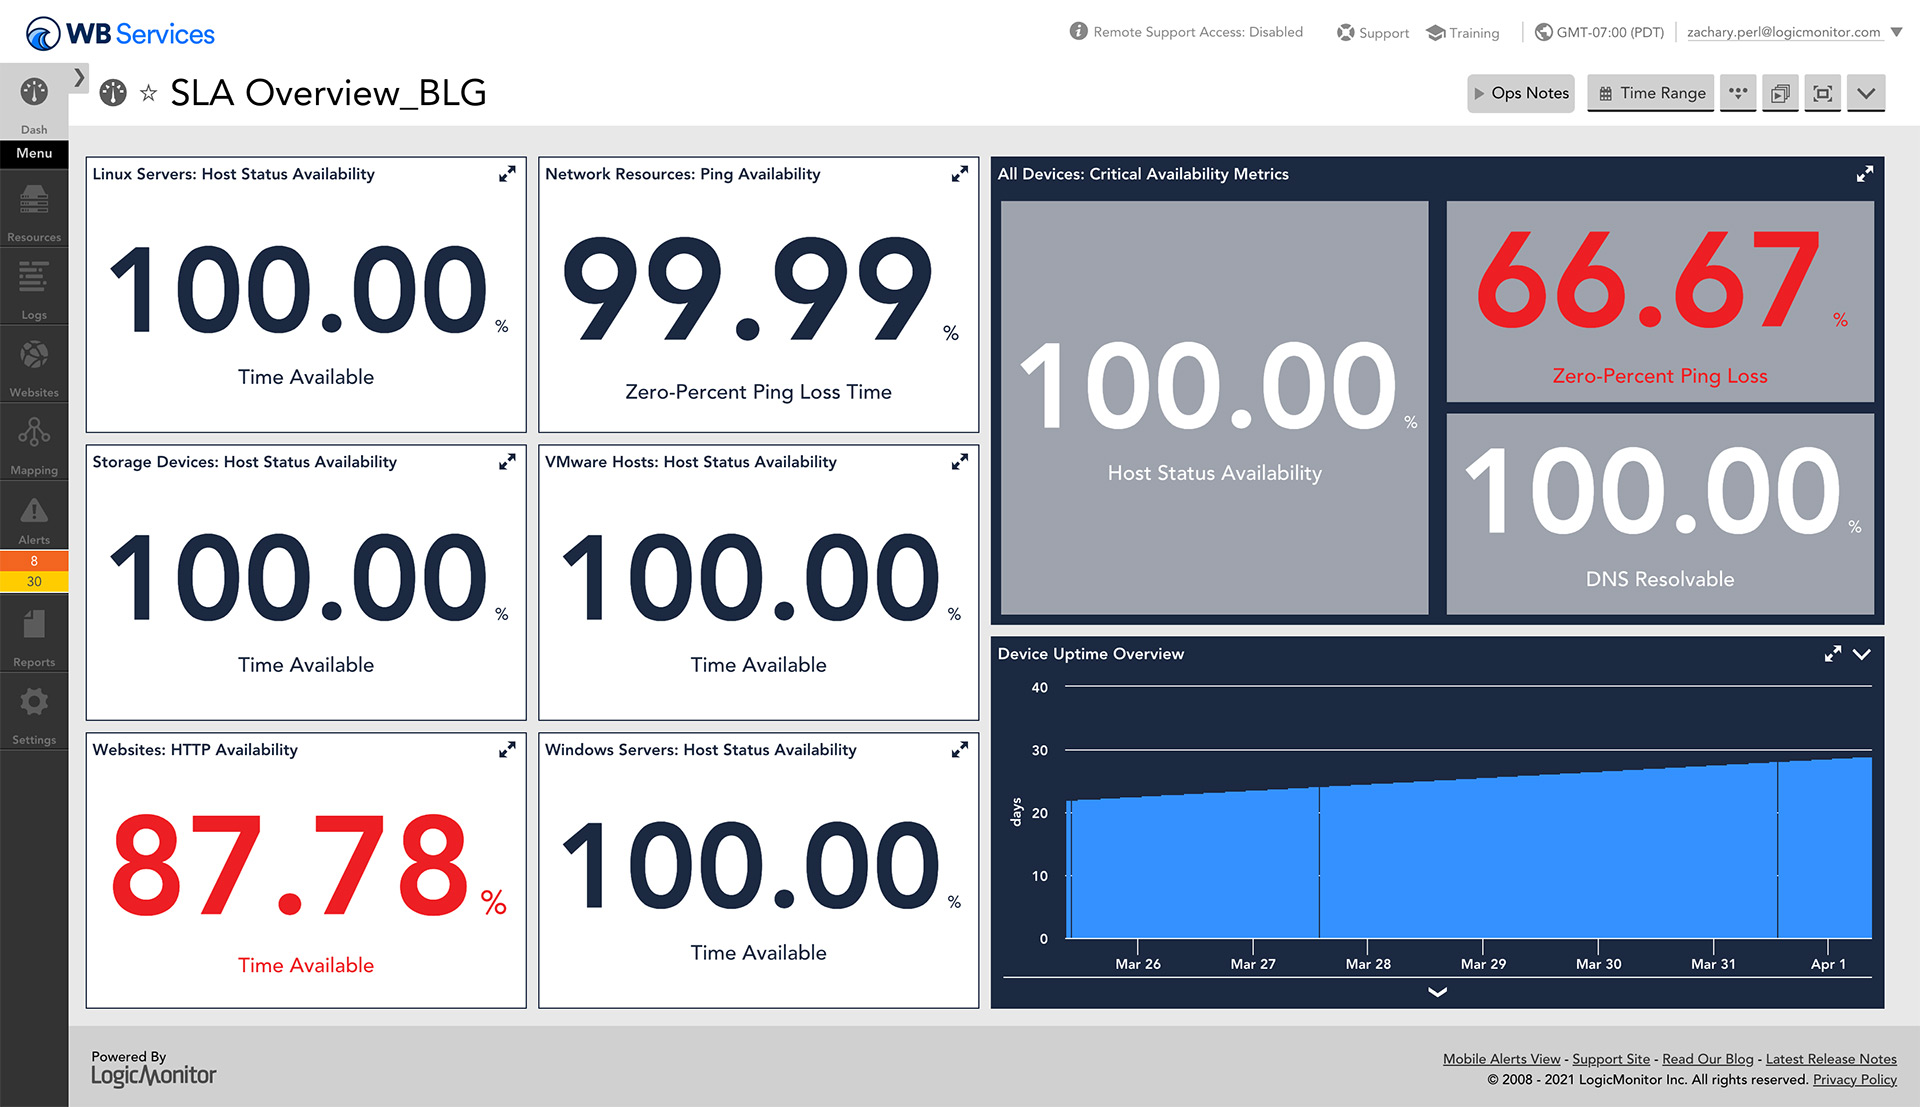 a logicmonitor dashboard showing SLAs and uptime for MSPs on a graph view